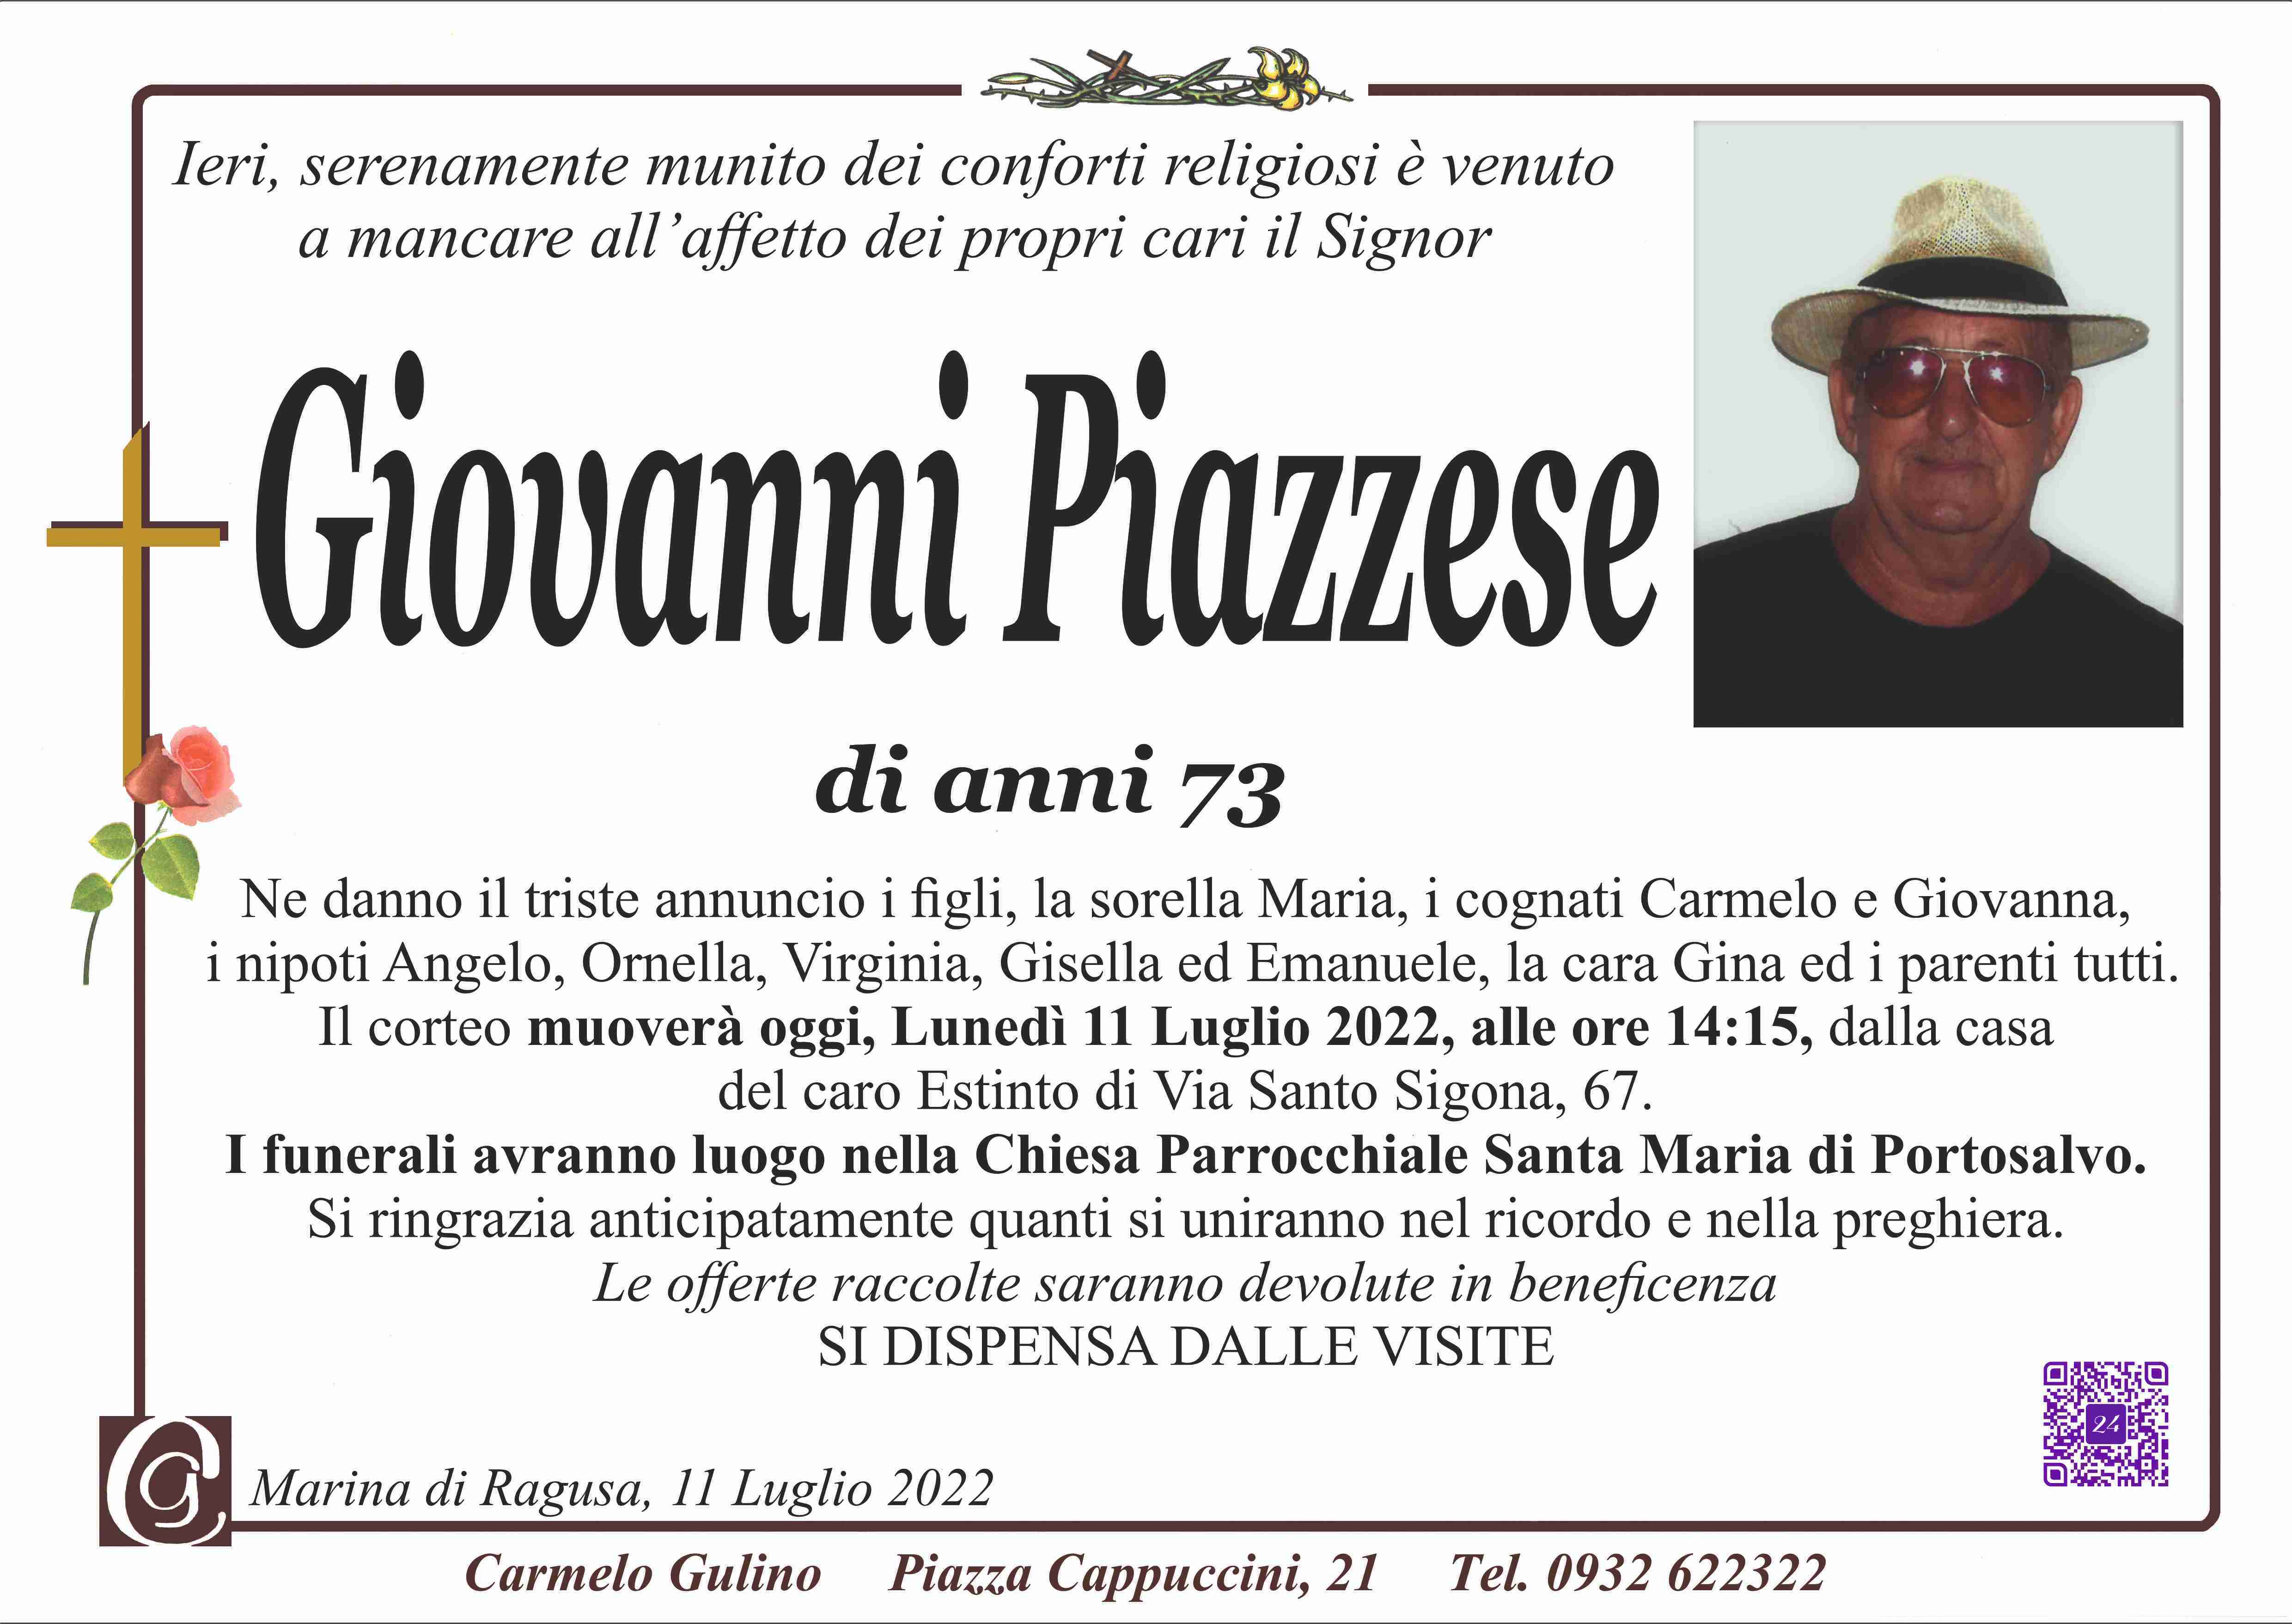 Giovanni Piazzese